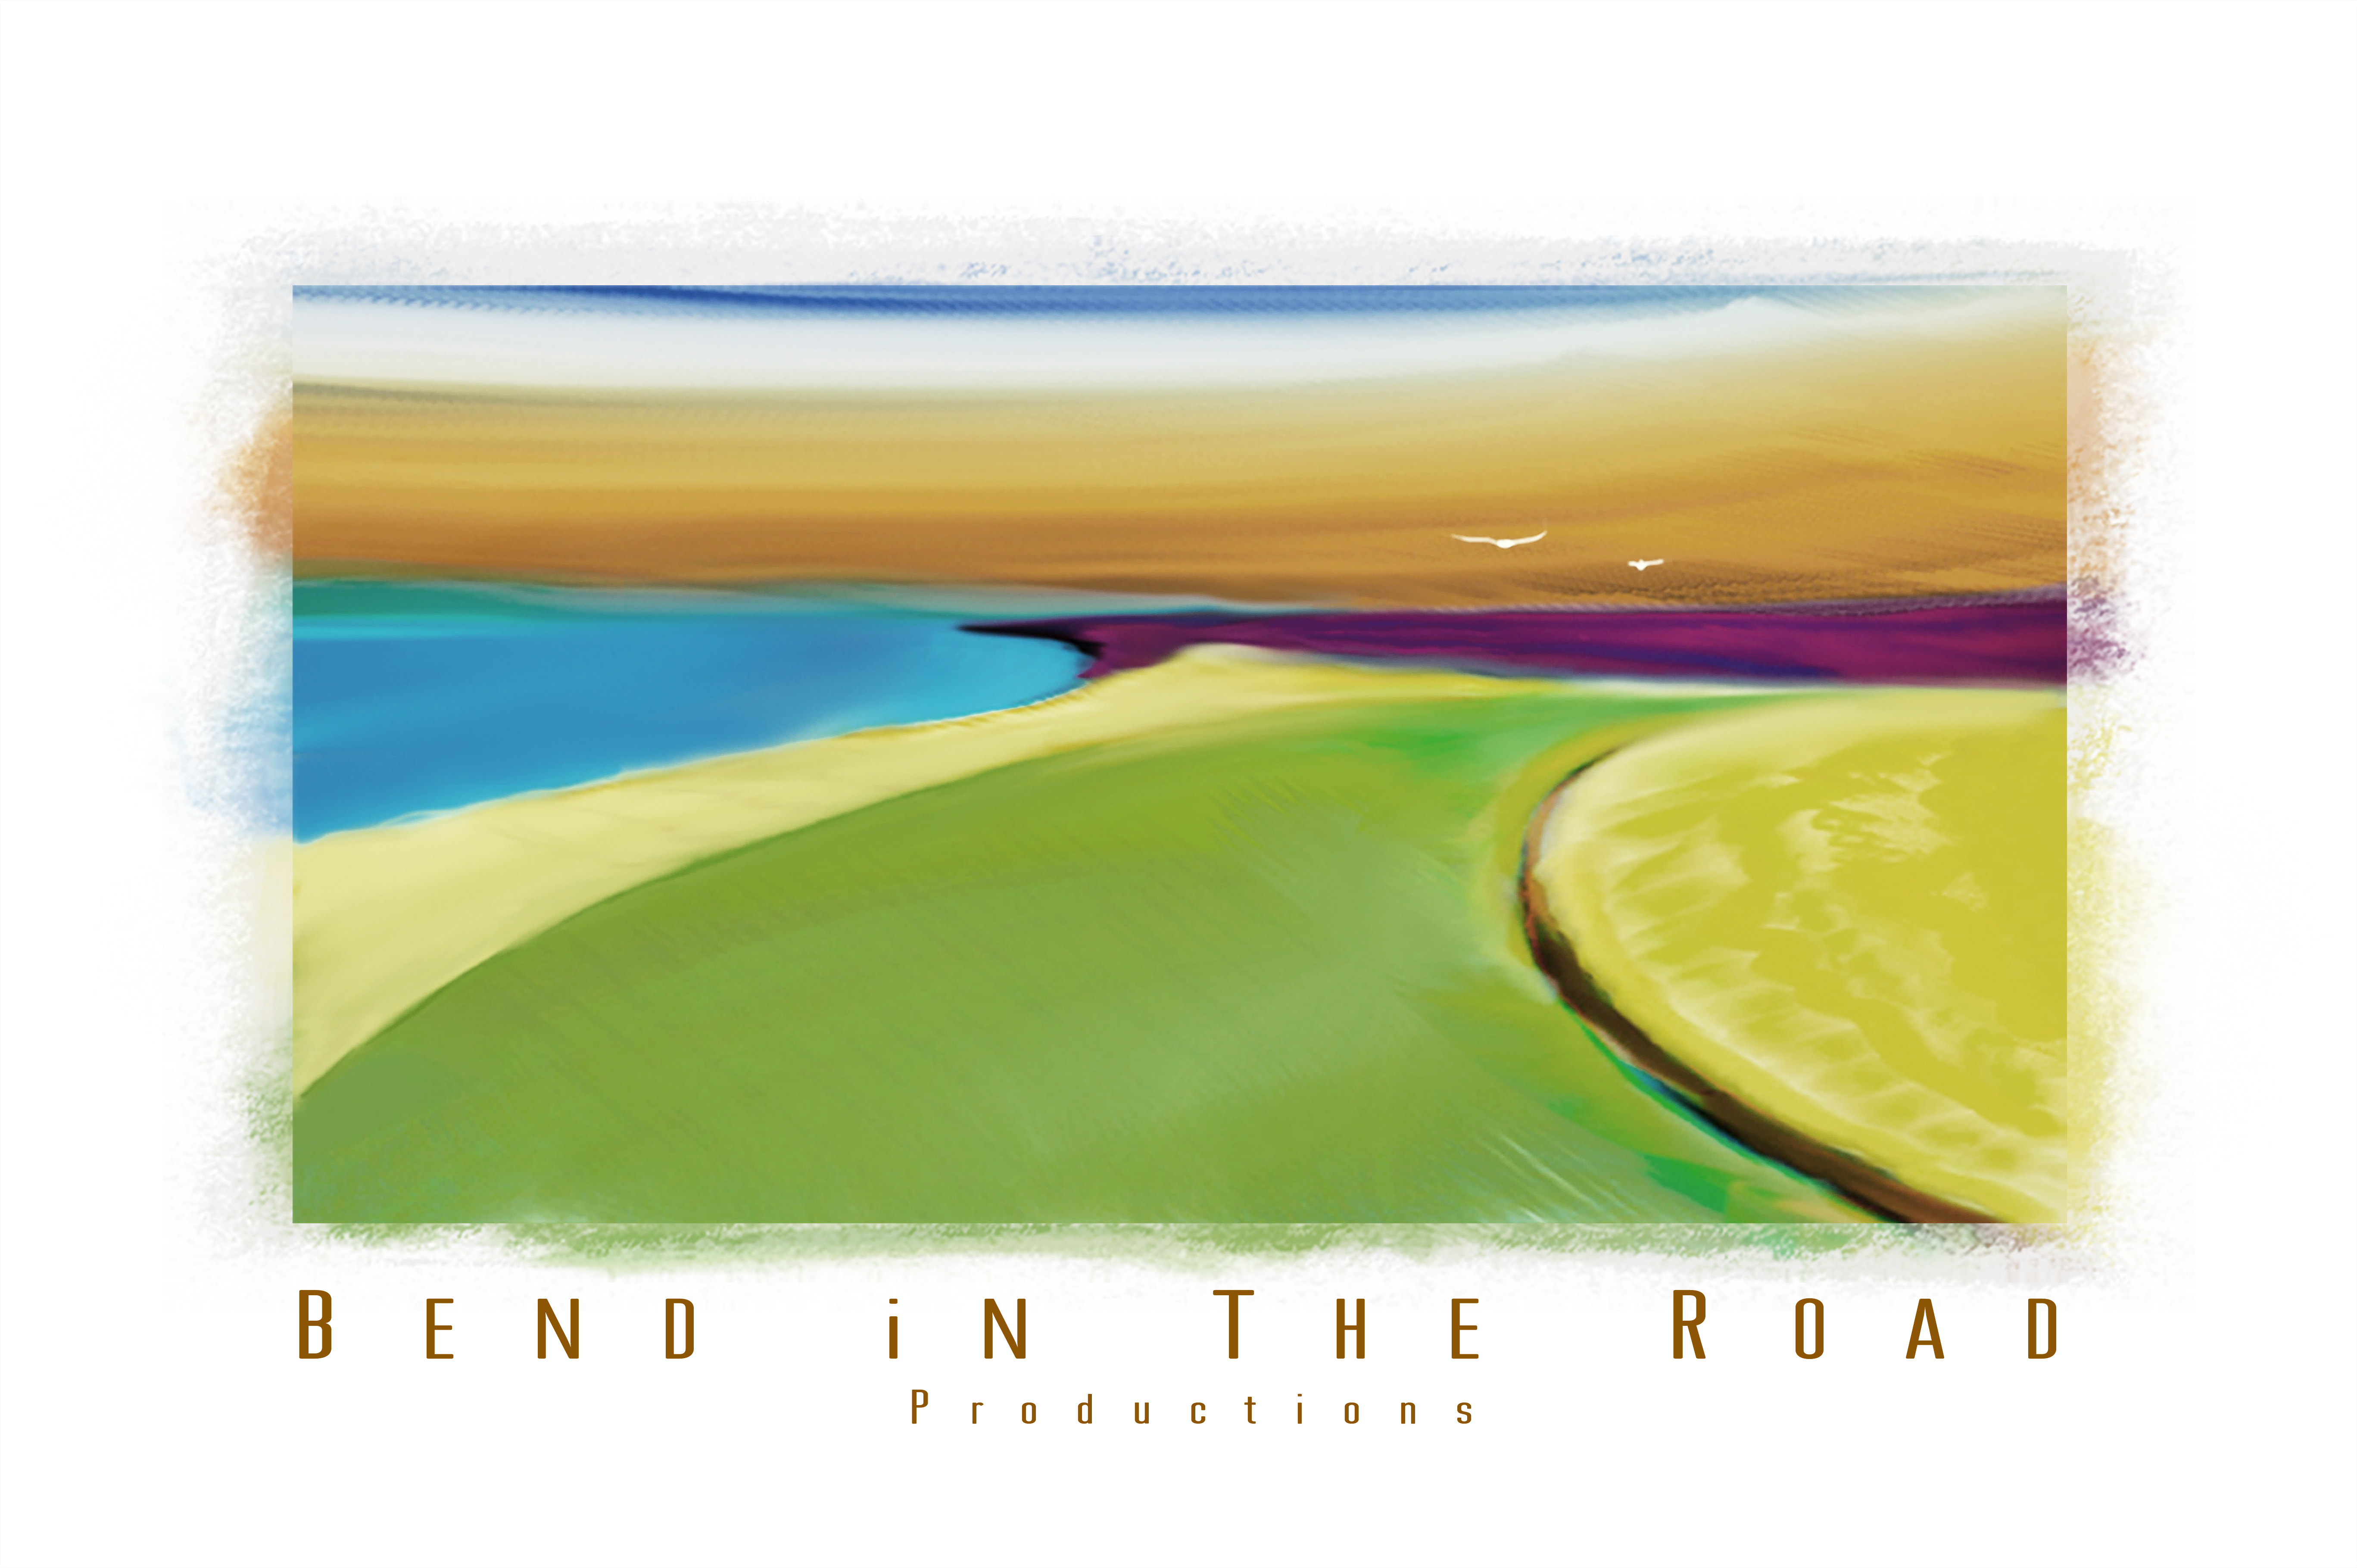 Bend in the Road – an Entertainment Identity